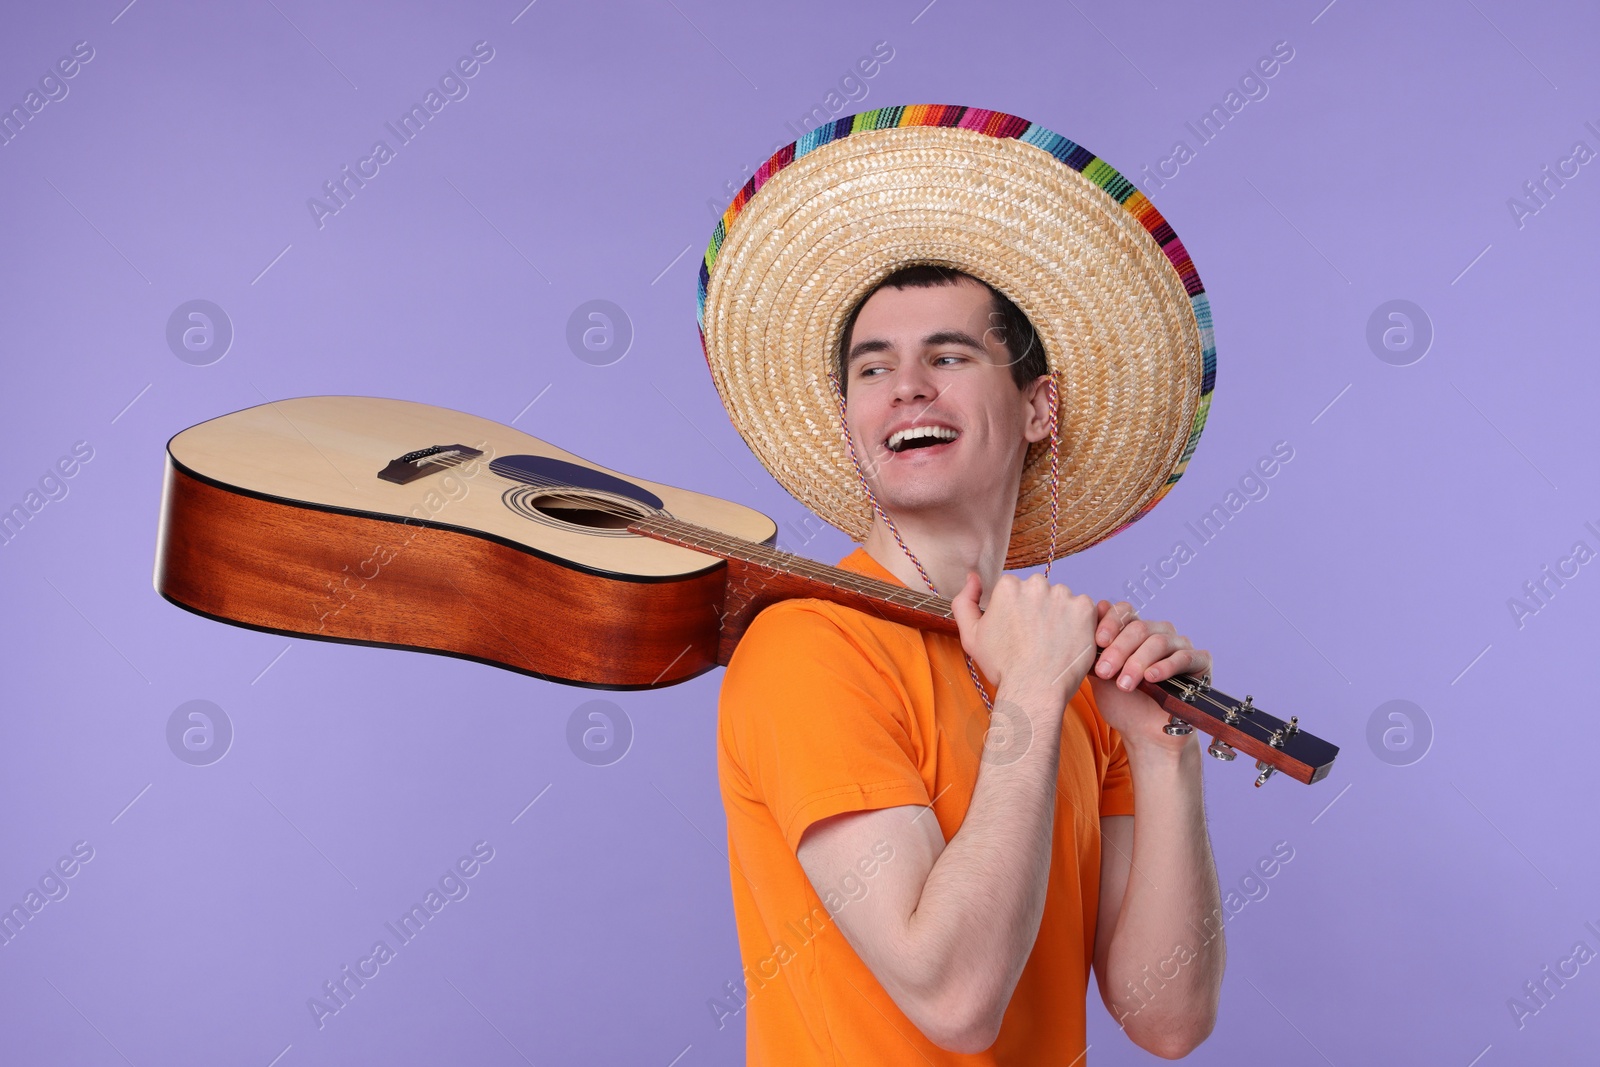 Photo of Young man in Mexican sombrero hat with guitar on violet background